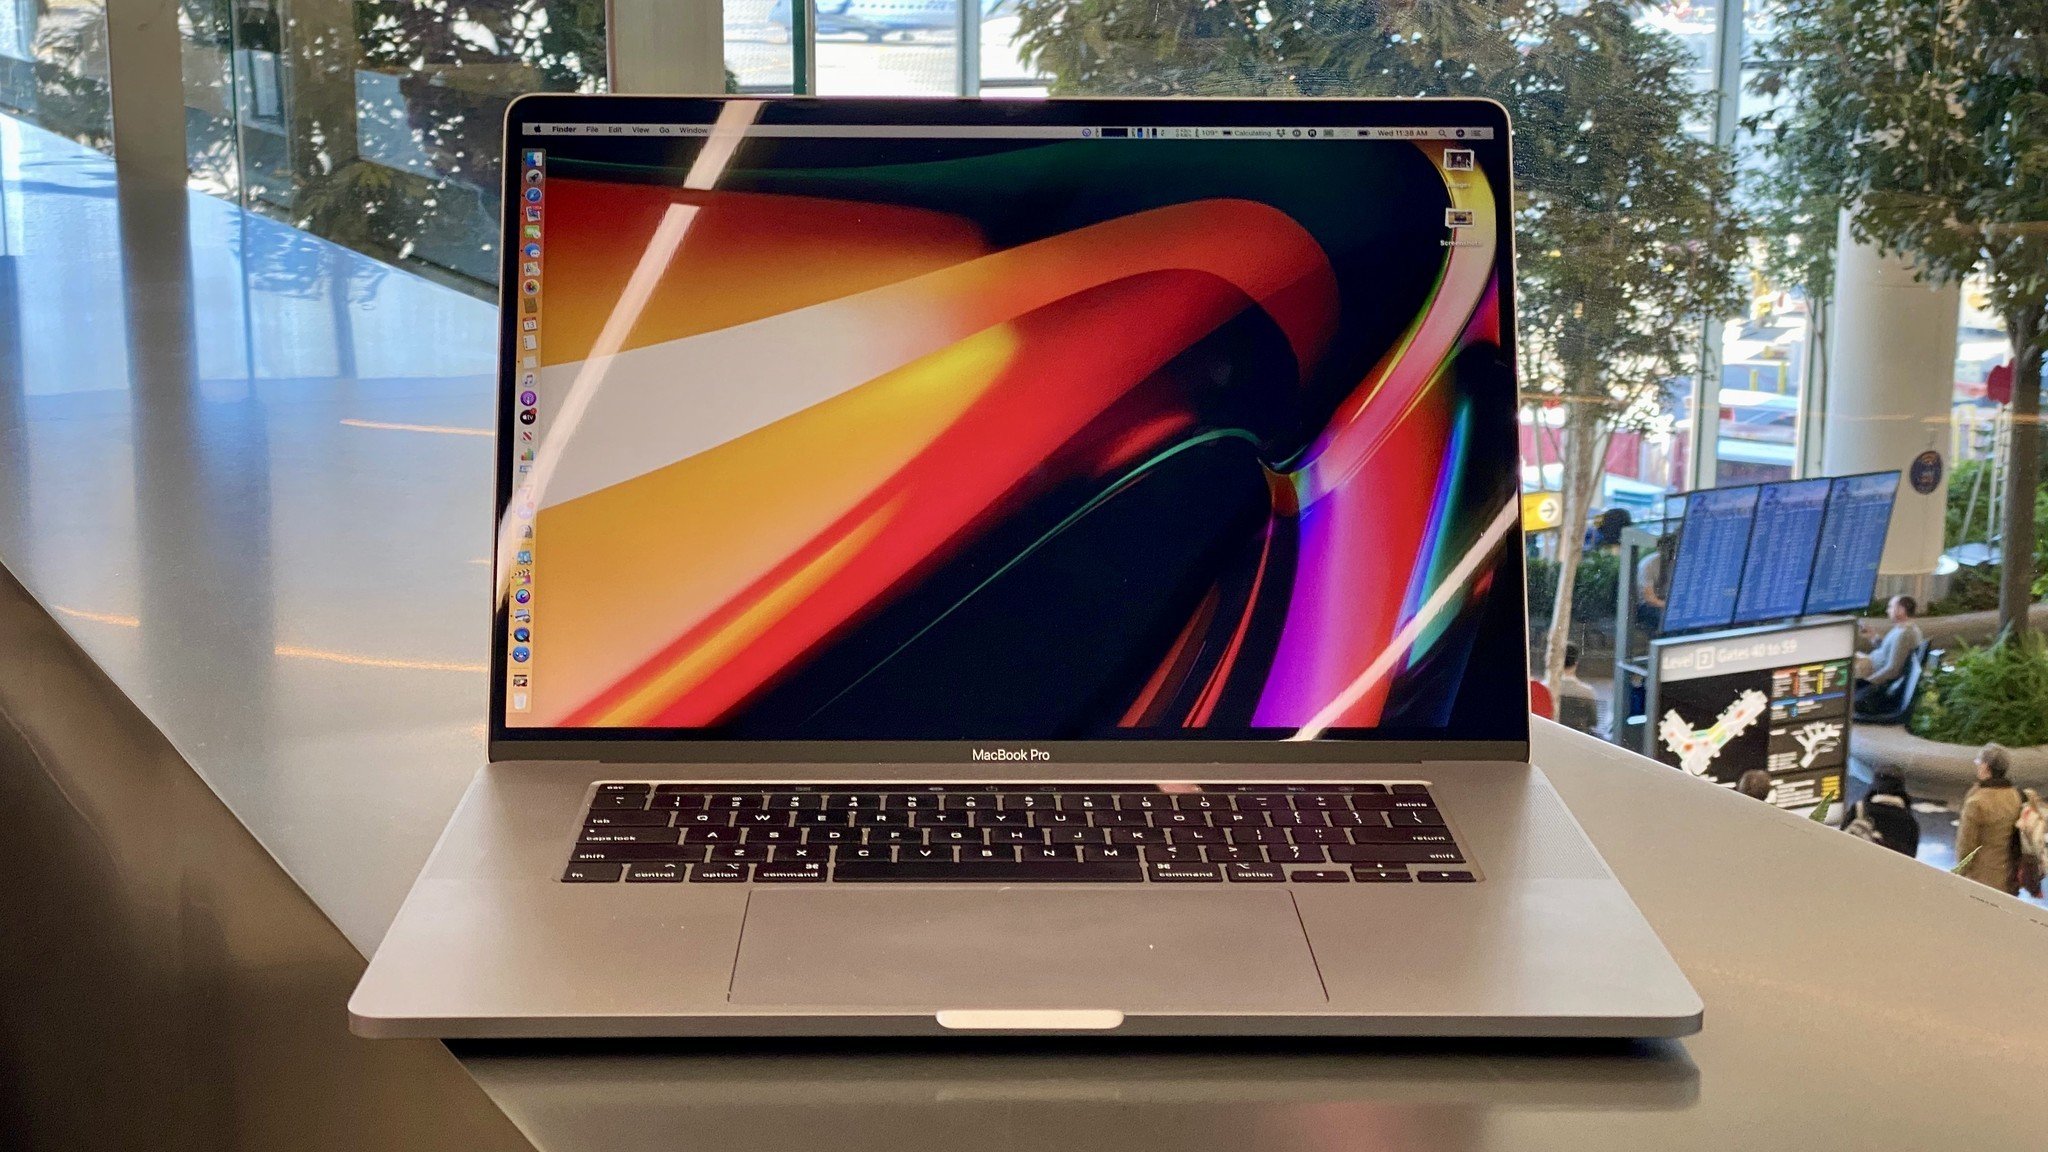 Macbook Pro Review: Battery Life